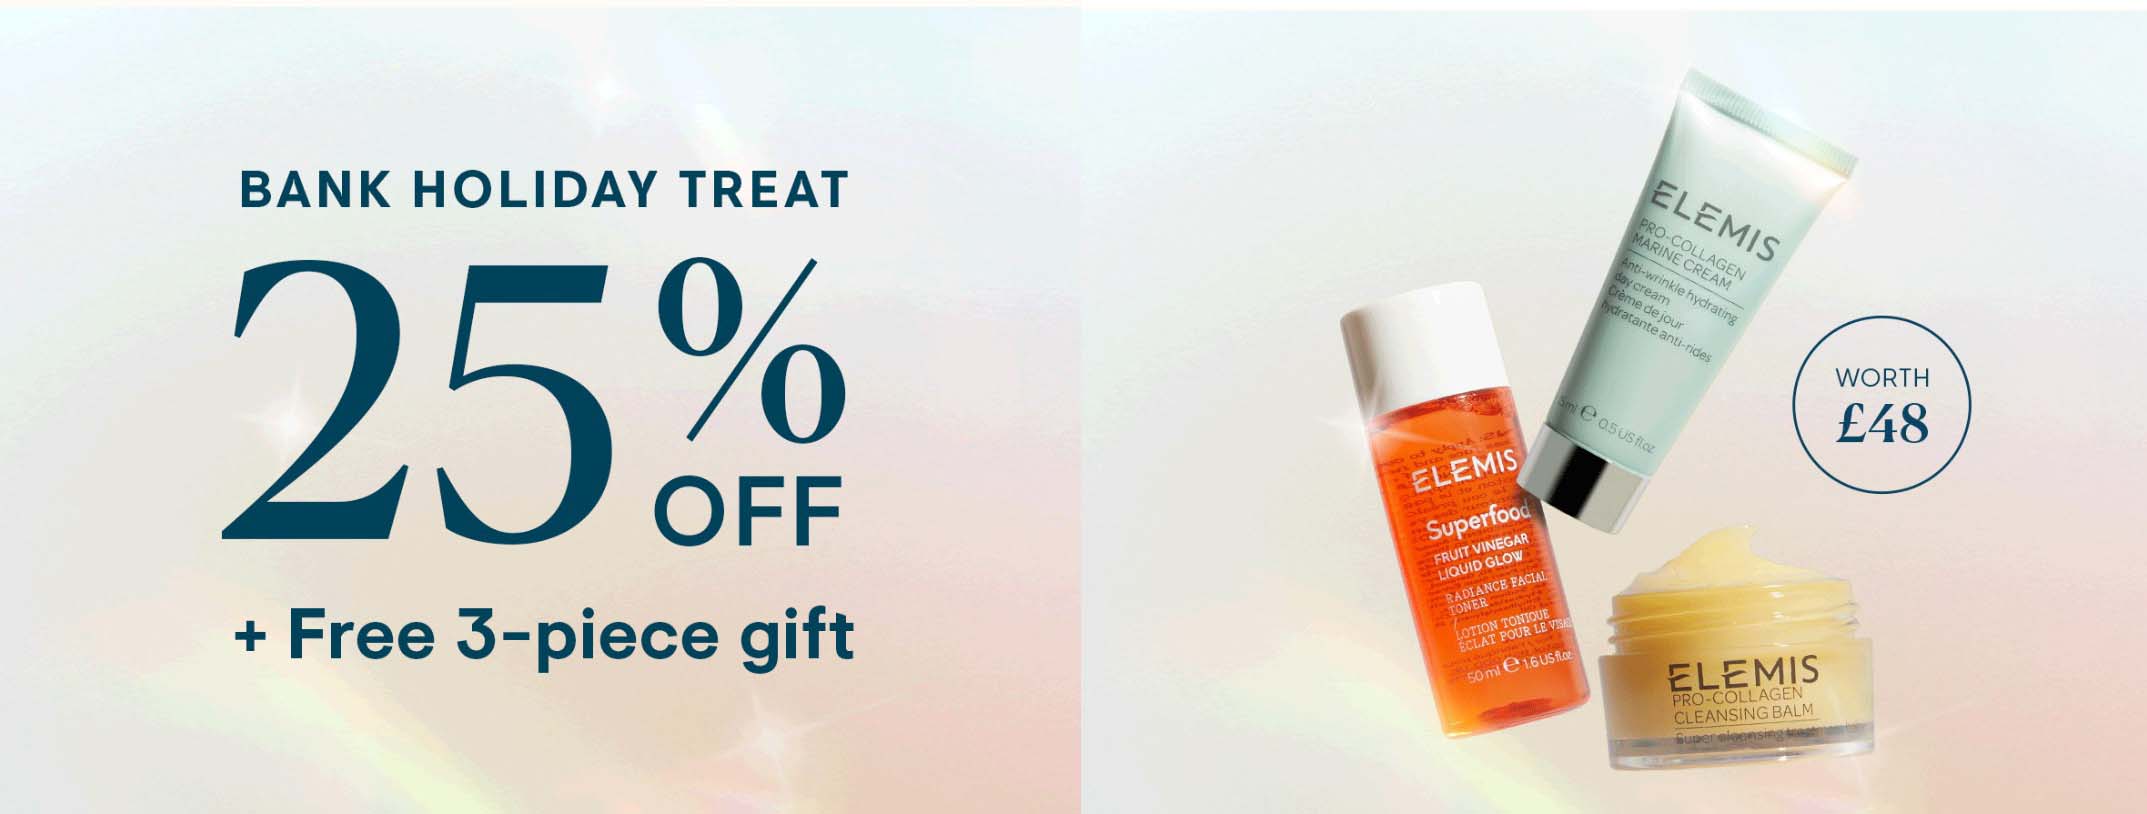 elemis.com25% off full-size products + Free 3-piece gift (worth £48) with a £100+ spend